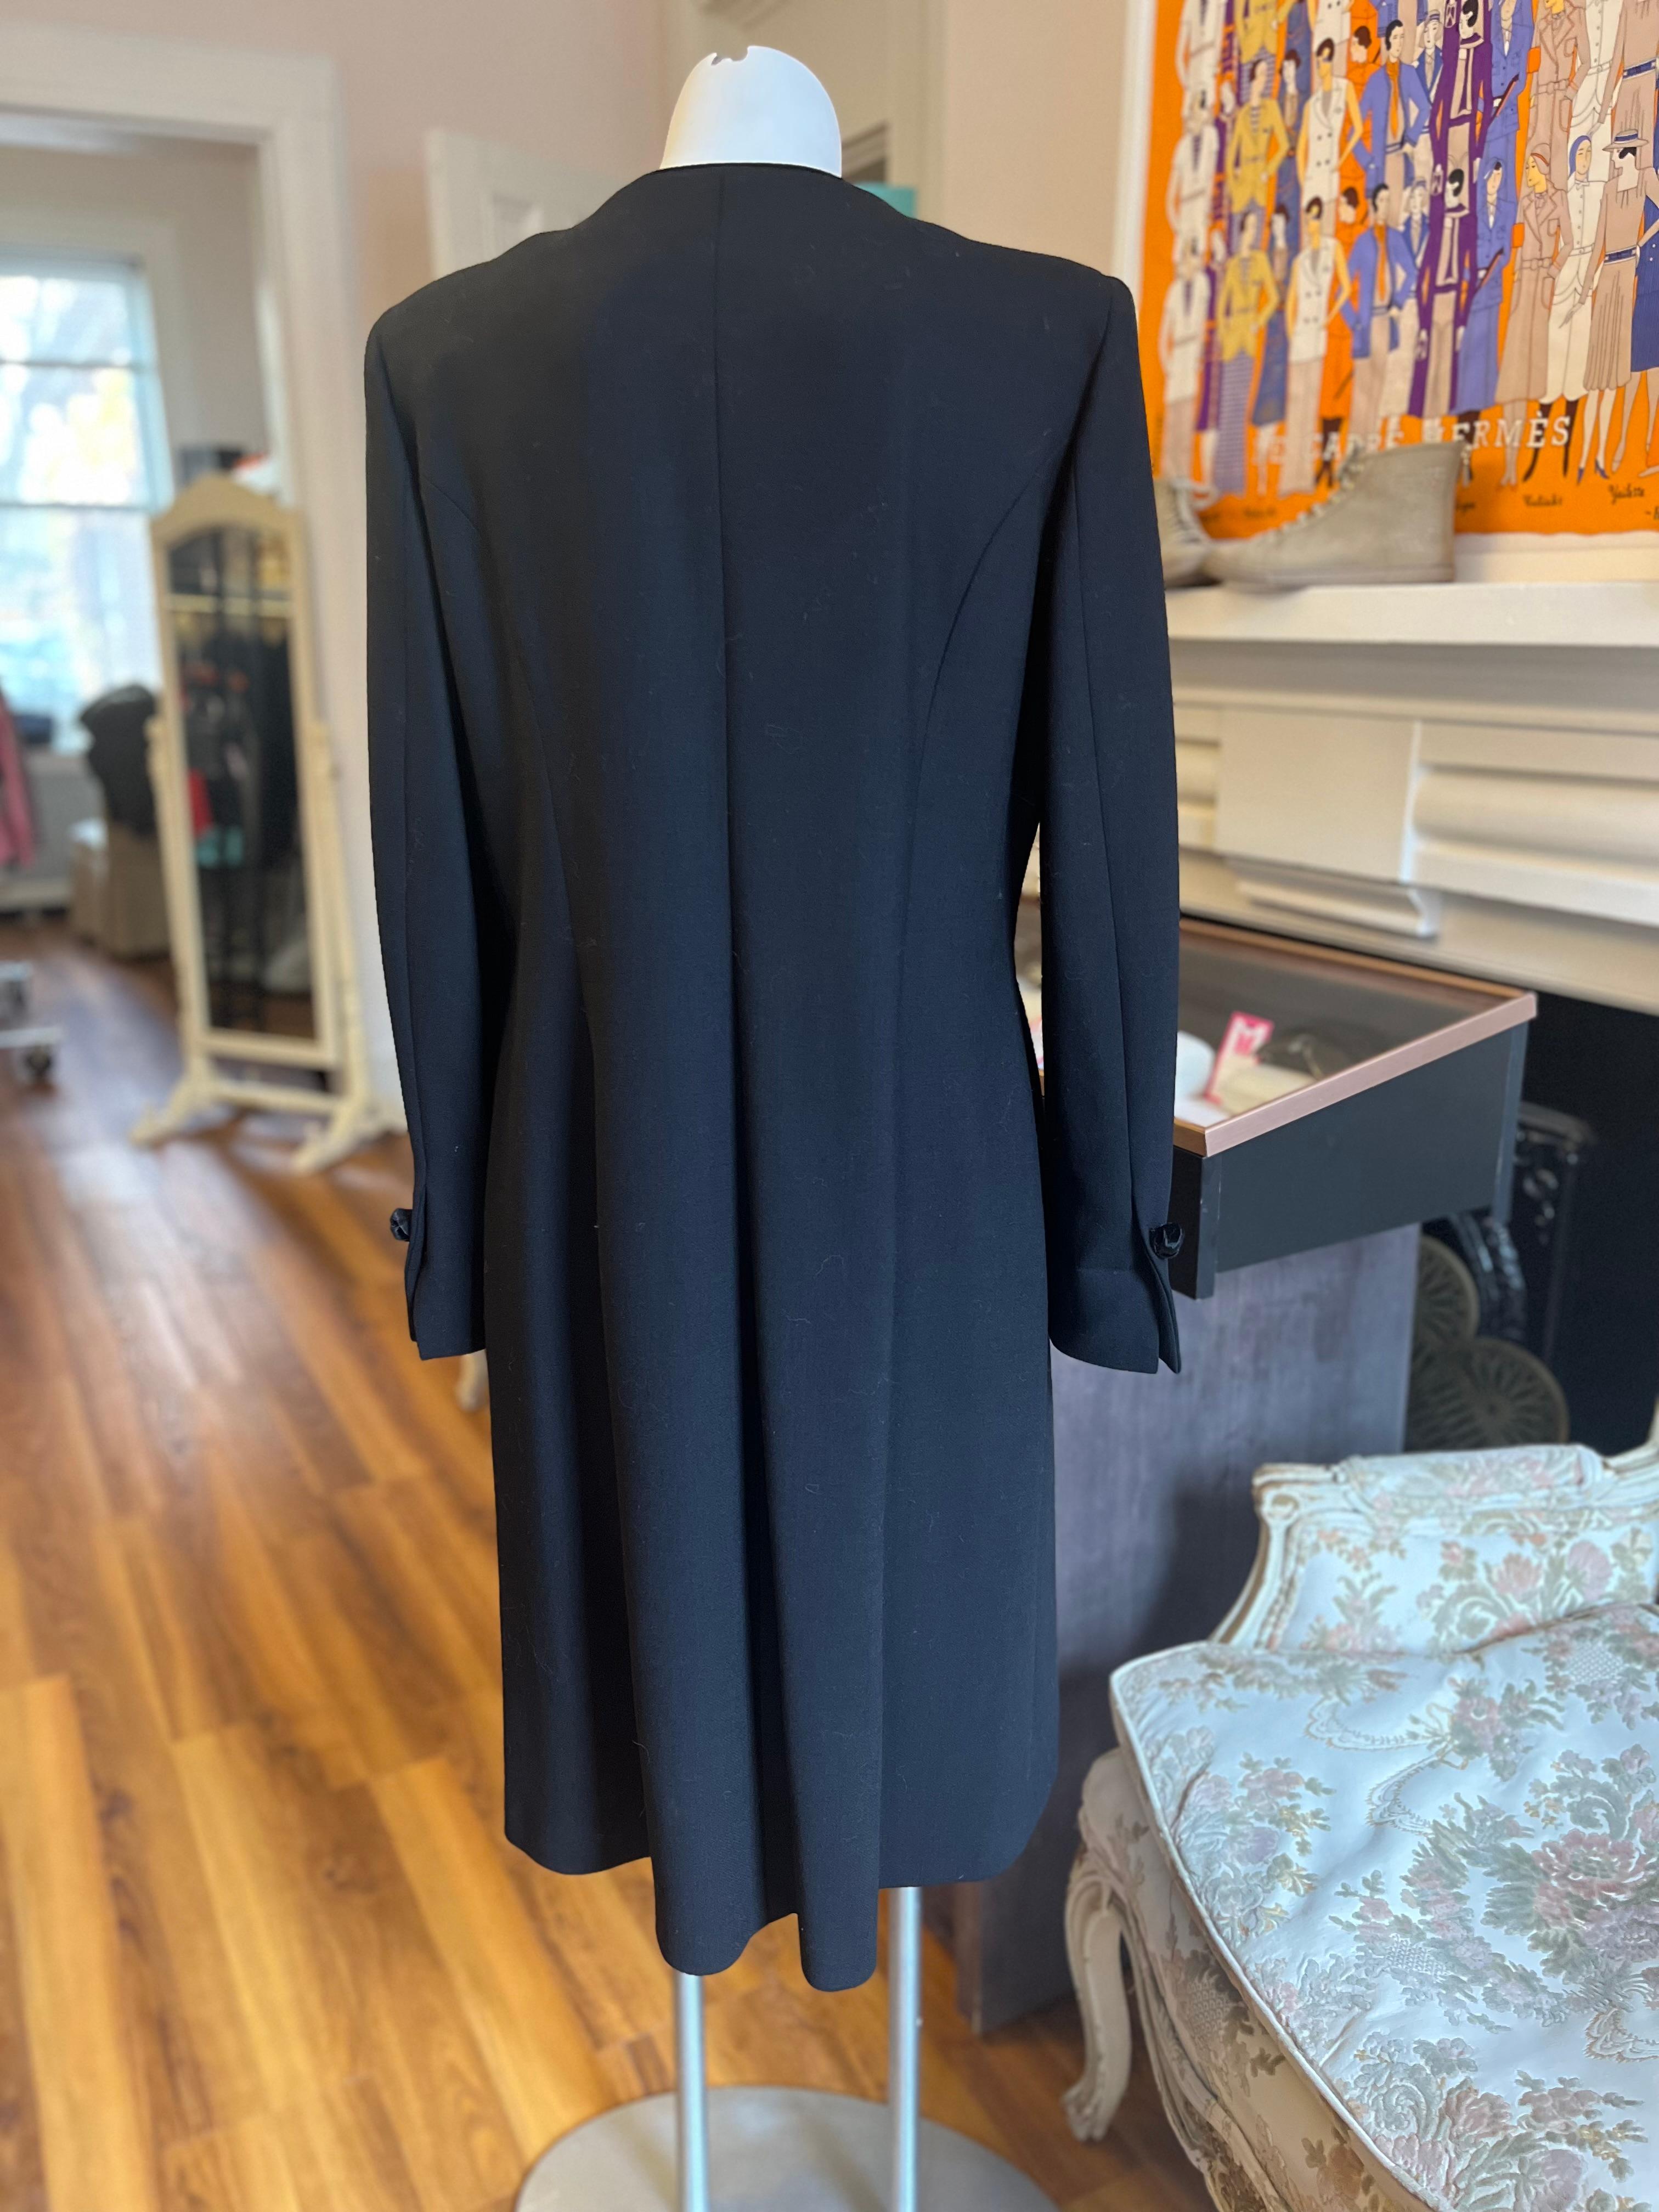 This is a Fendi 365 coat from the 1990s which is in as new condition. It is made of 75% wool 10% viscose, 10% rayon and 5% silk. The coat is trimmed with black velvet and there are ornamental velvet knot buttons, both at the front and on the cuffs.